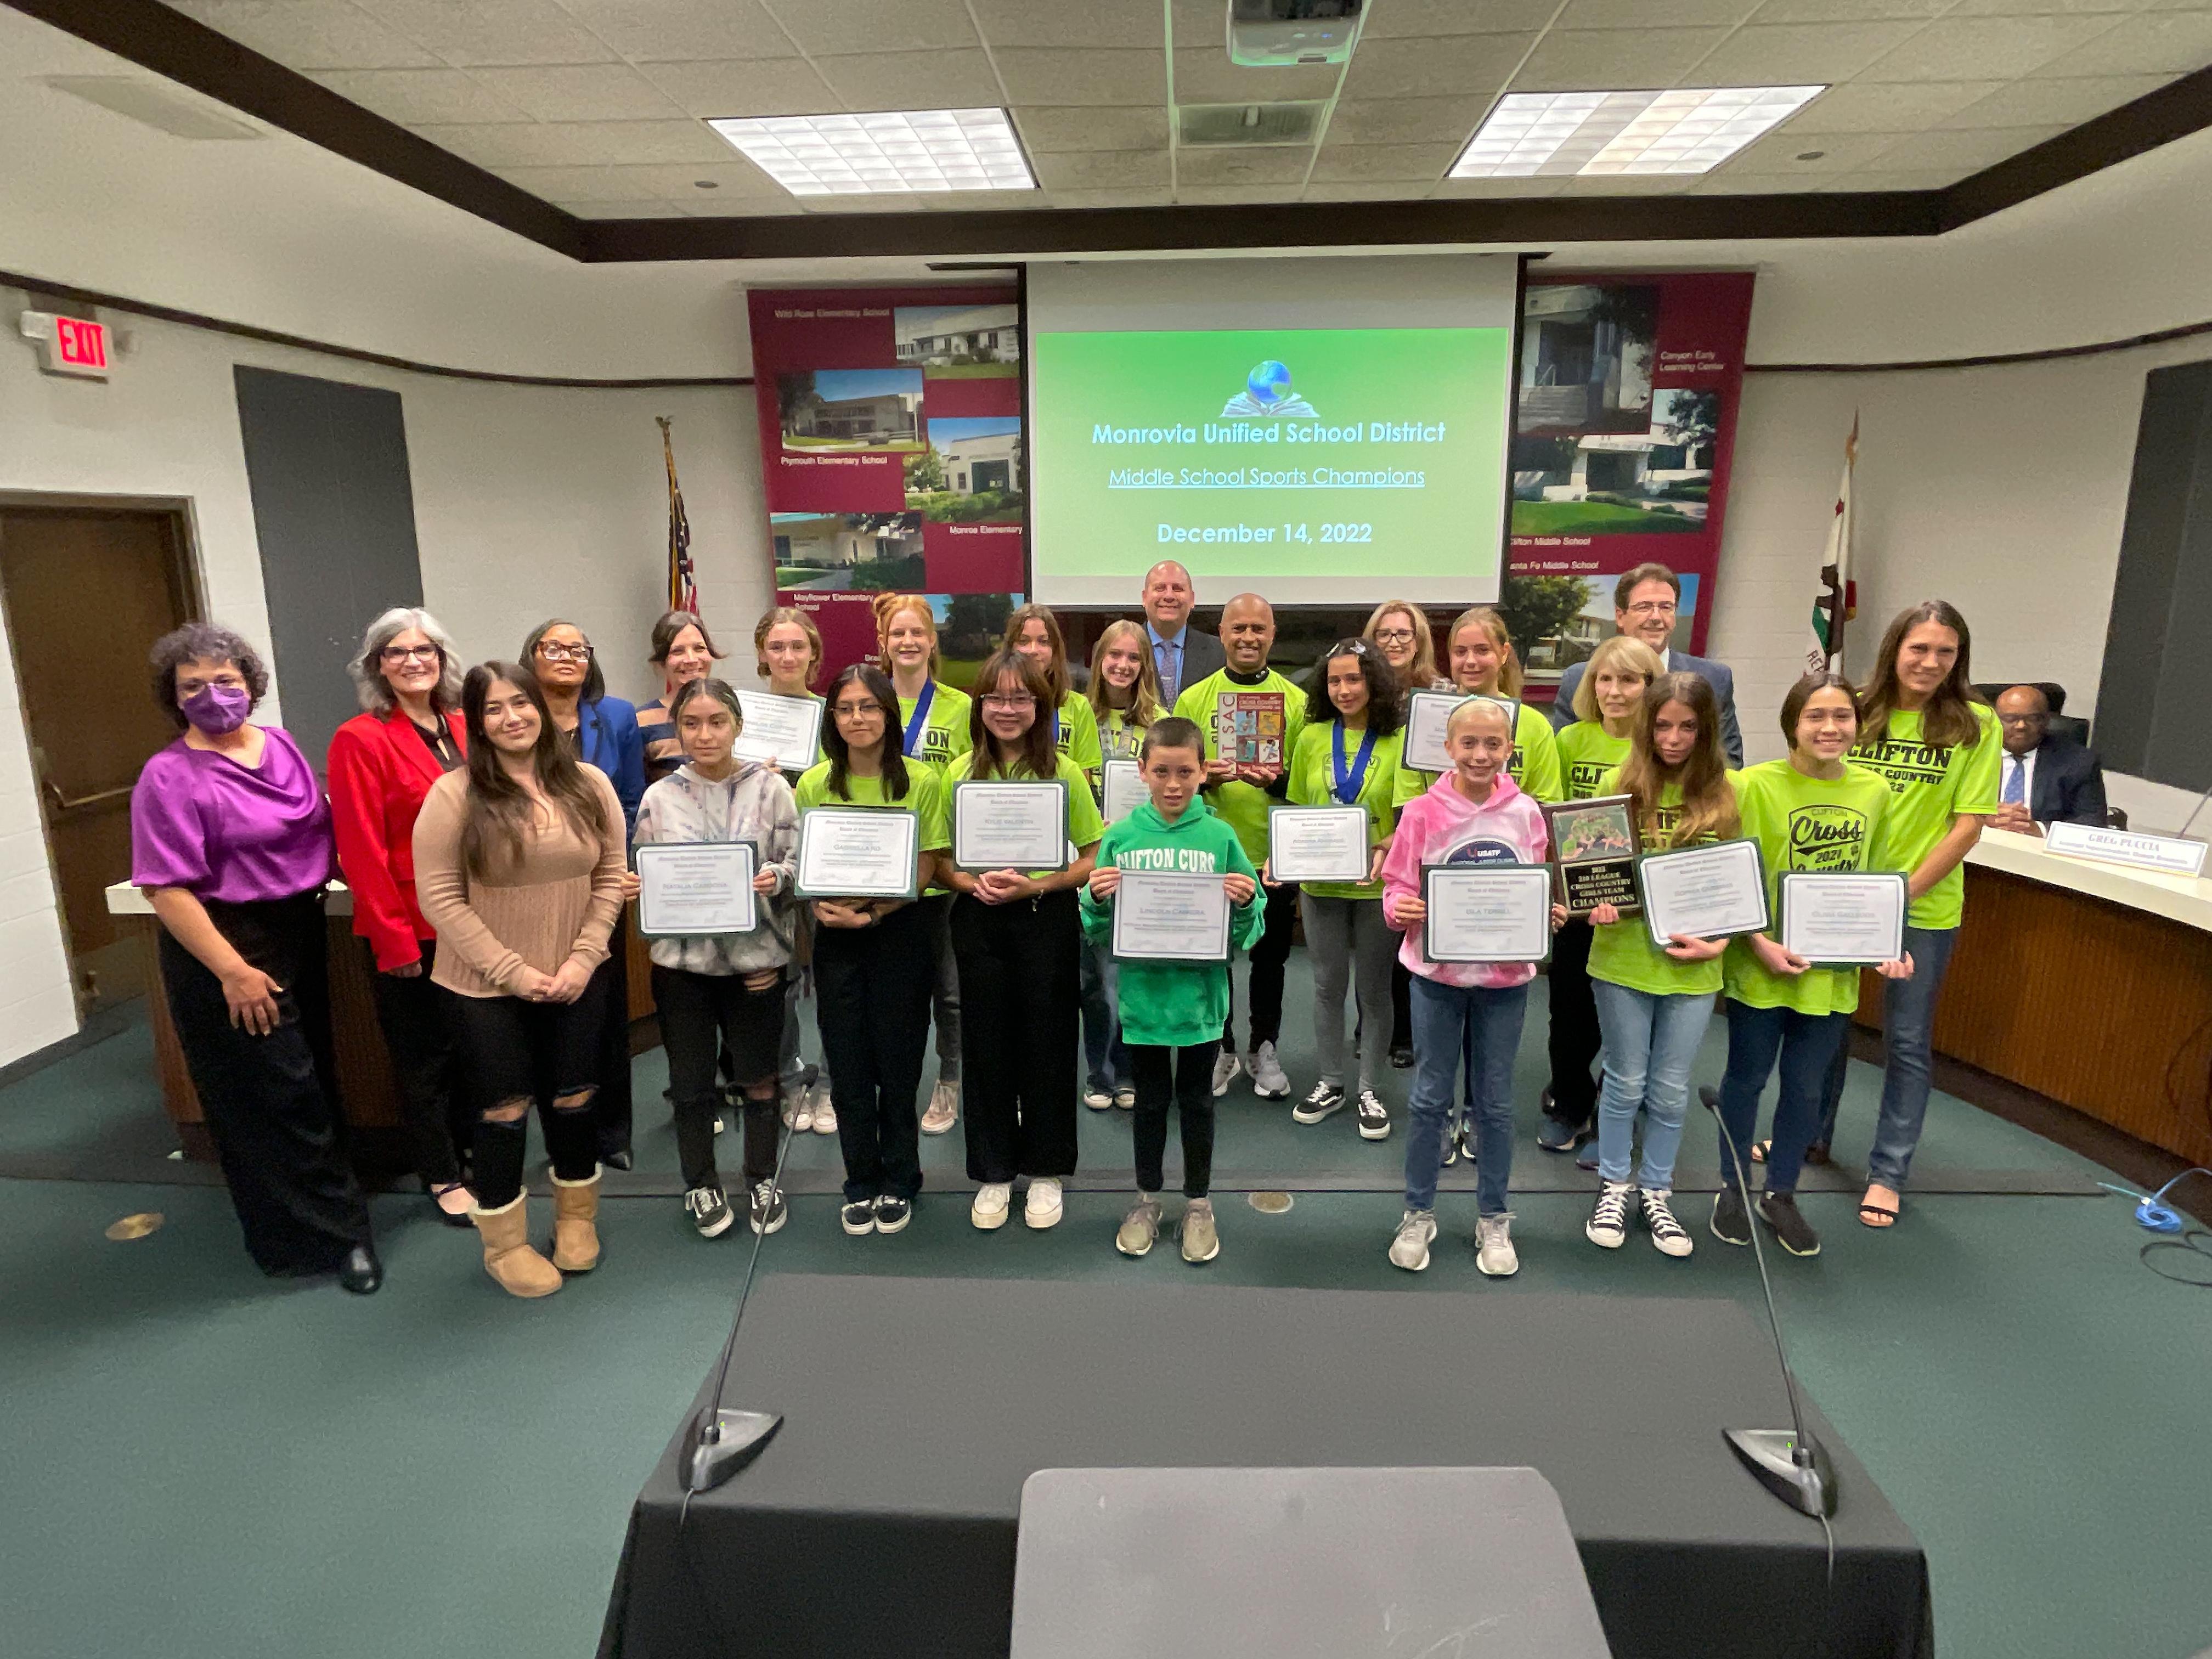 The Board also recognized Middle School Sports Champions from both Clifton and Santa Fe. 